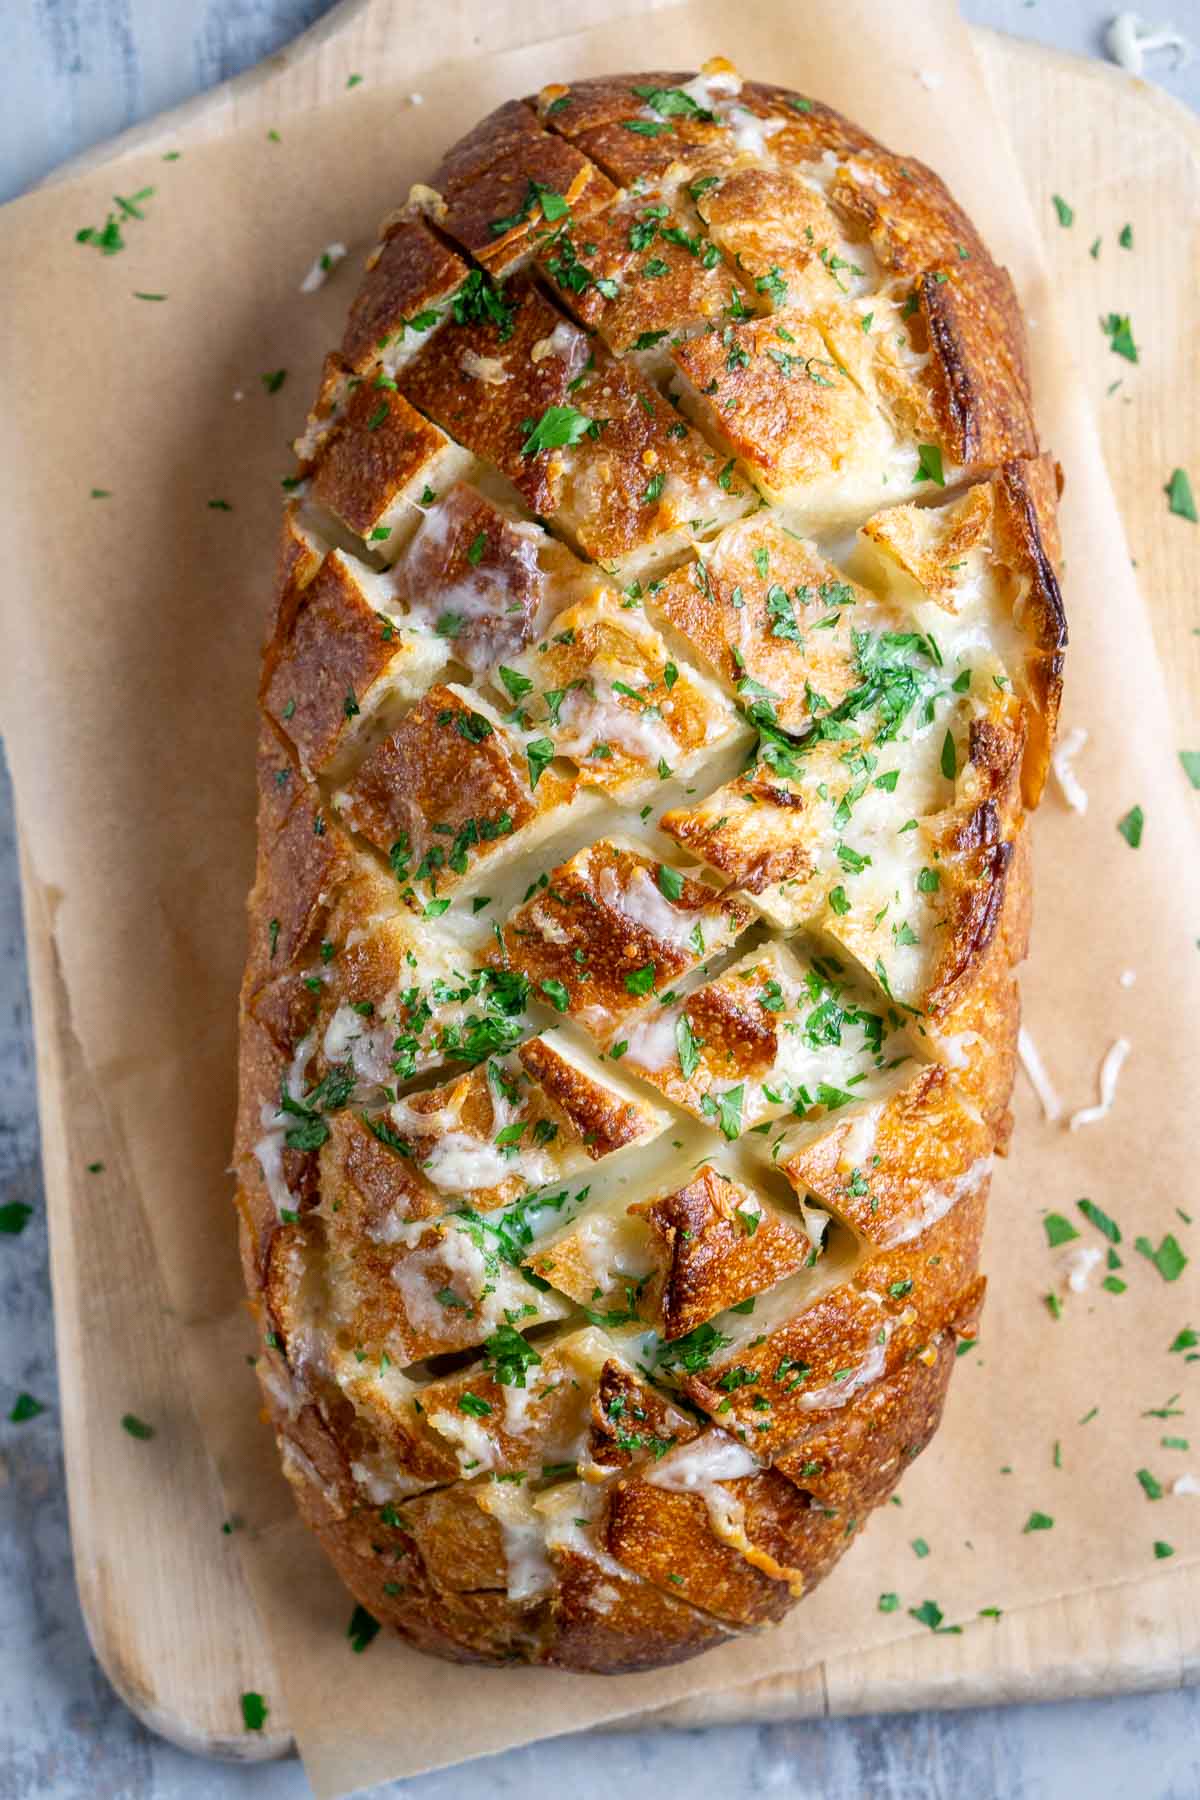 baked cheesy pull apart bread on parchment-lined cutting board ready to serve